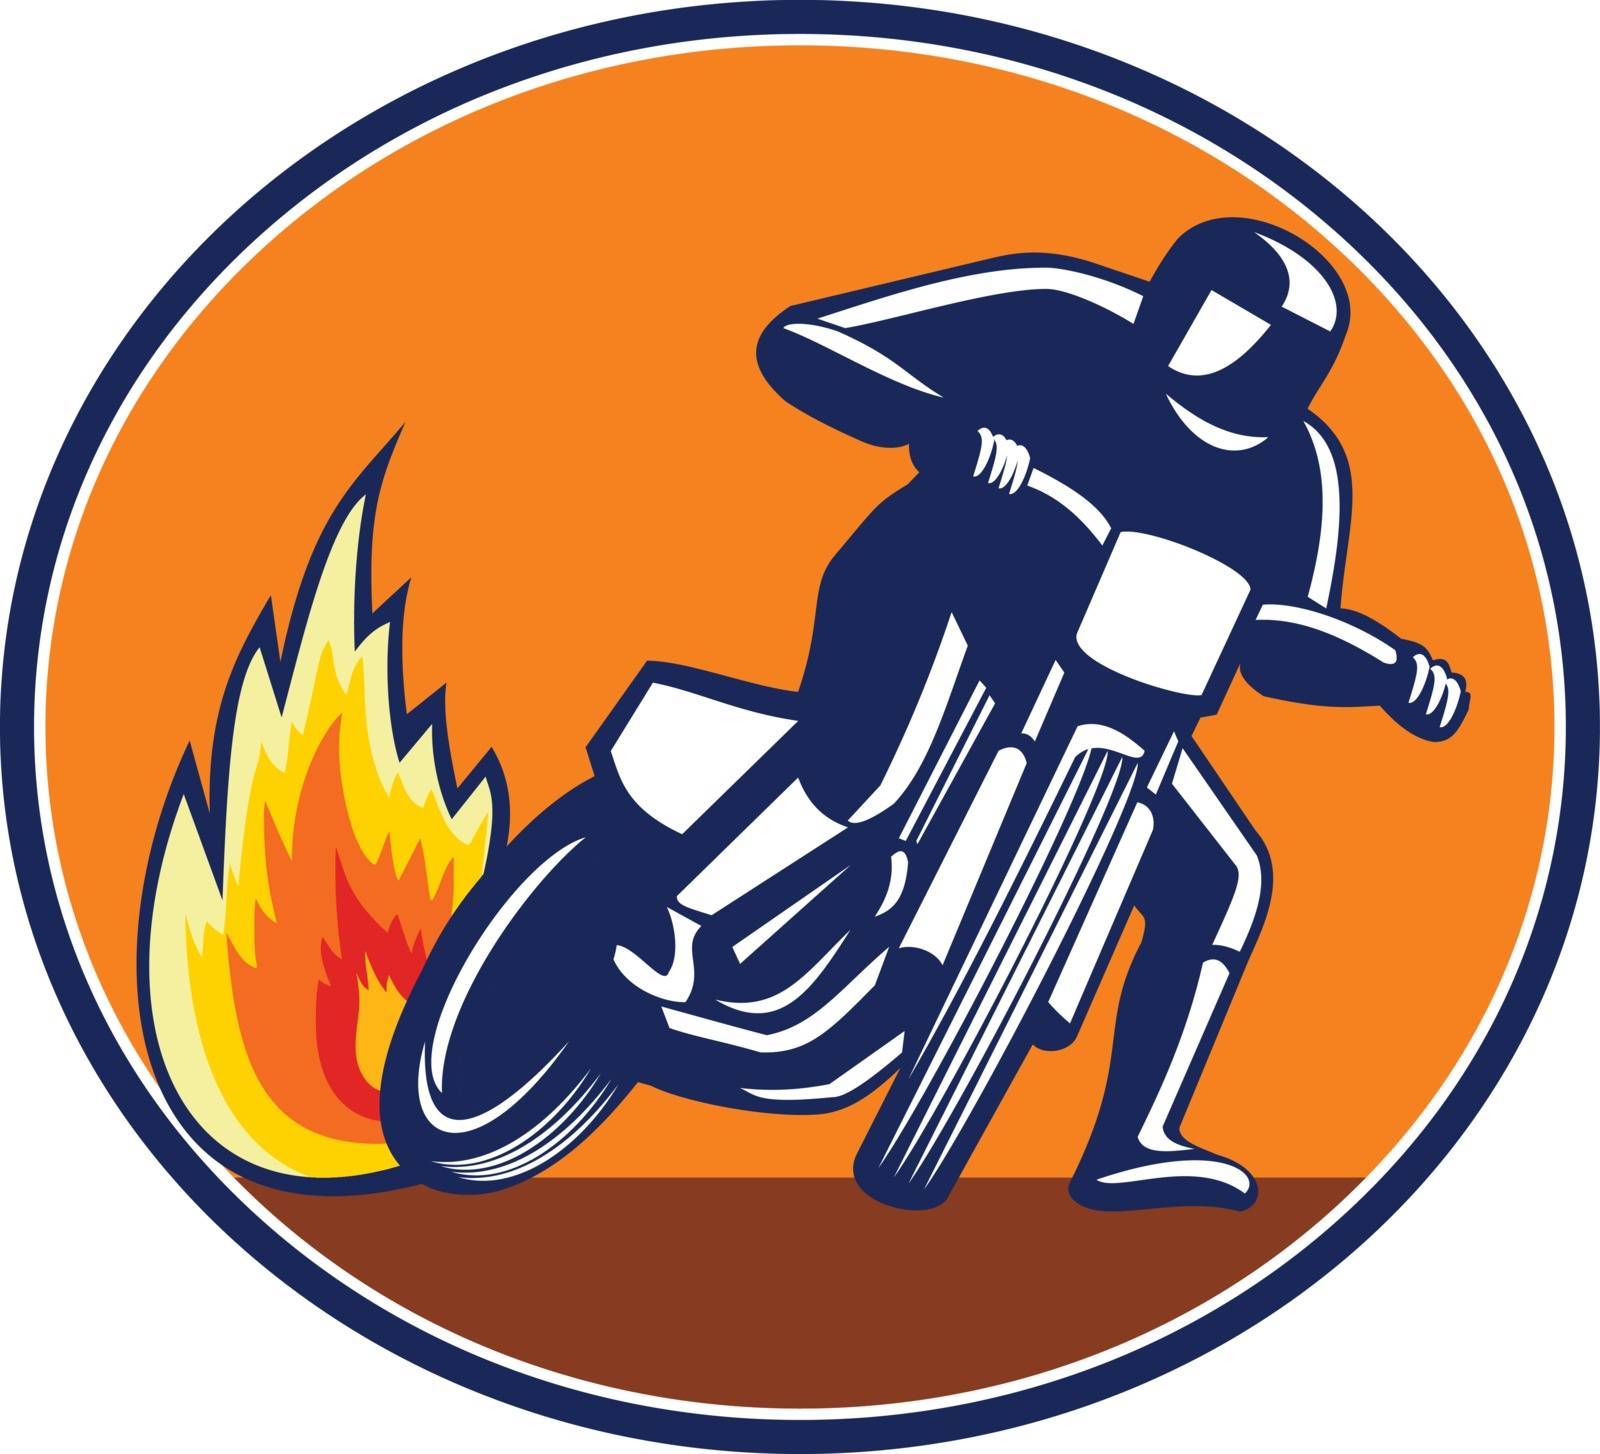 Mascot icon illustration of a motorcycle rider riding bike, flat track racing or dirt track racing viewed from front set inside oval shape on isolated background in retro style.